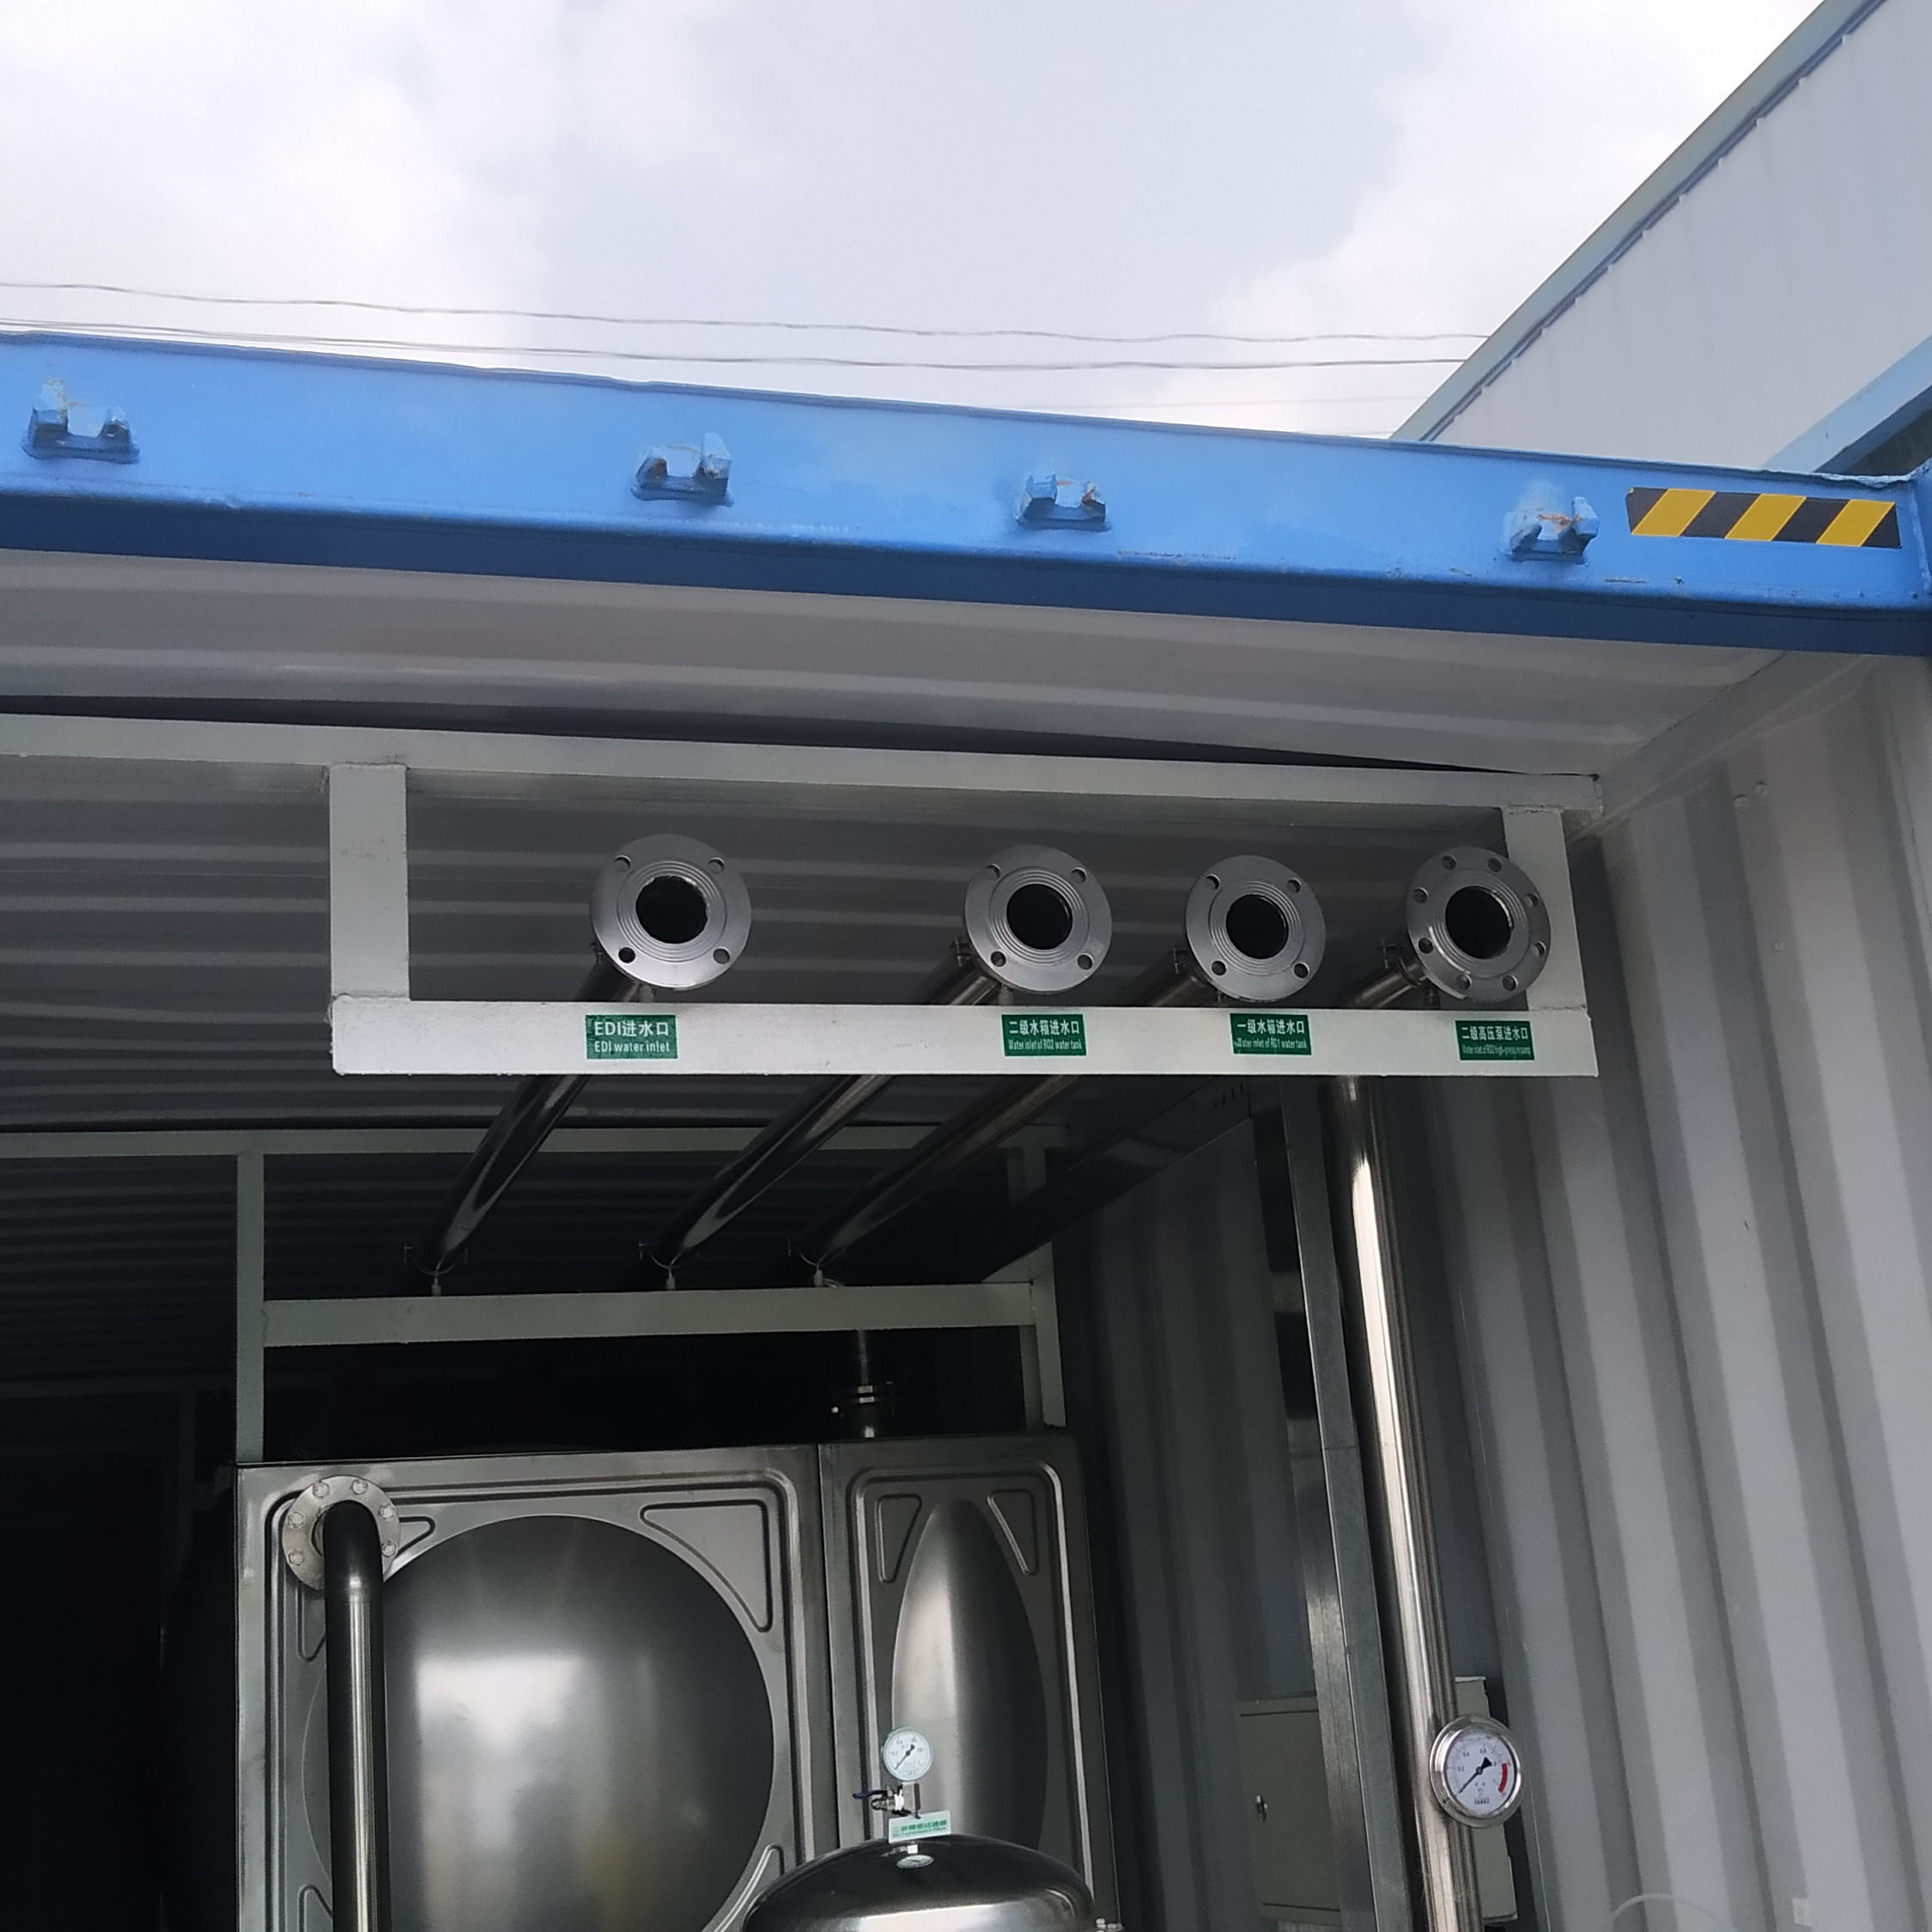 Mobile container purified water system widely used in outdoor water treatment from Chinese factory ZZ